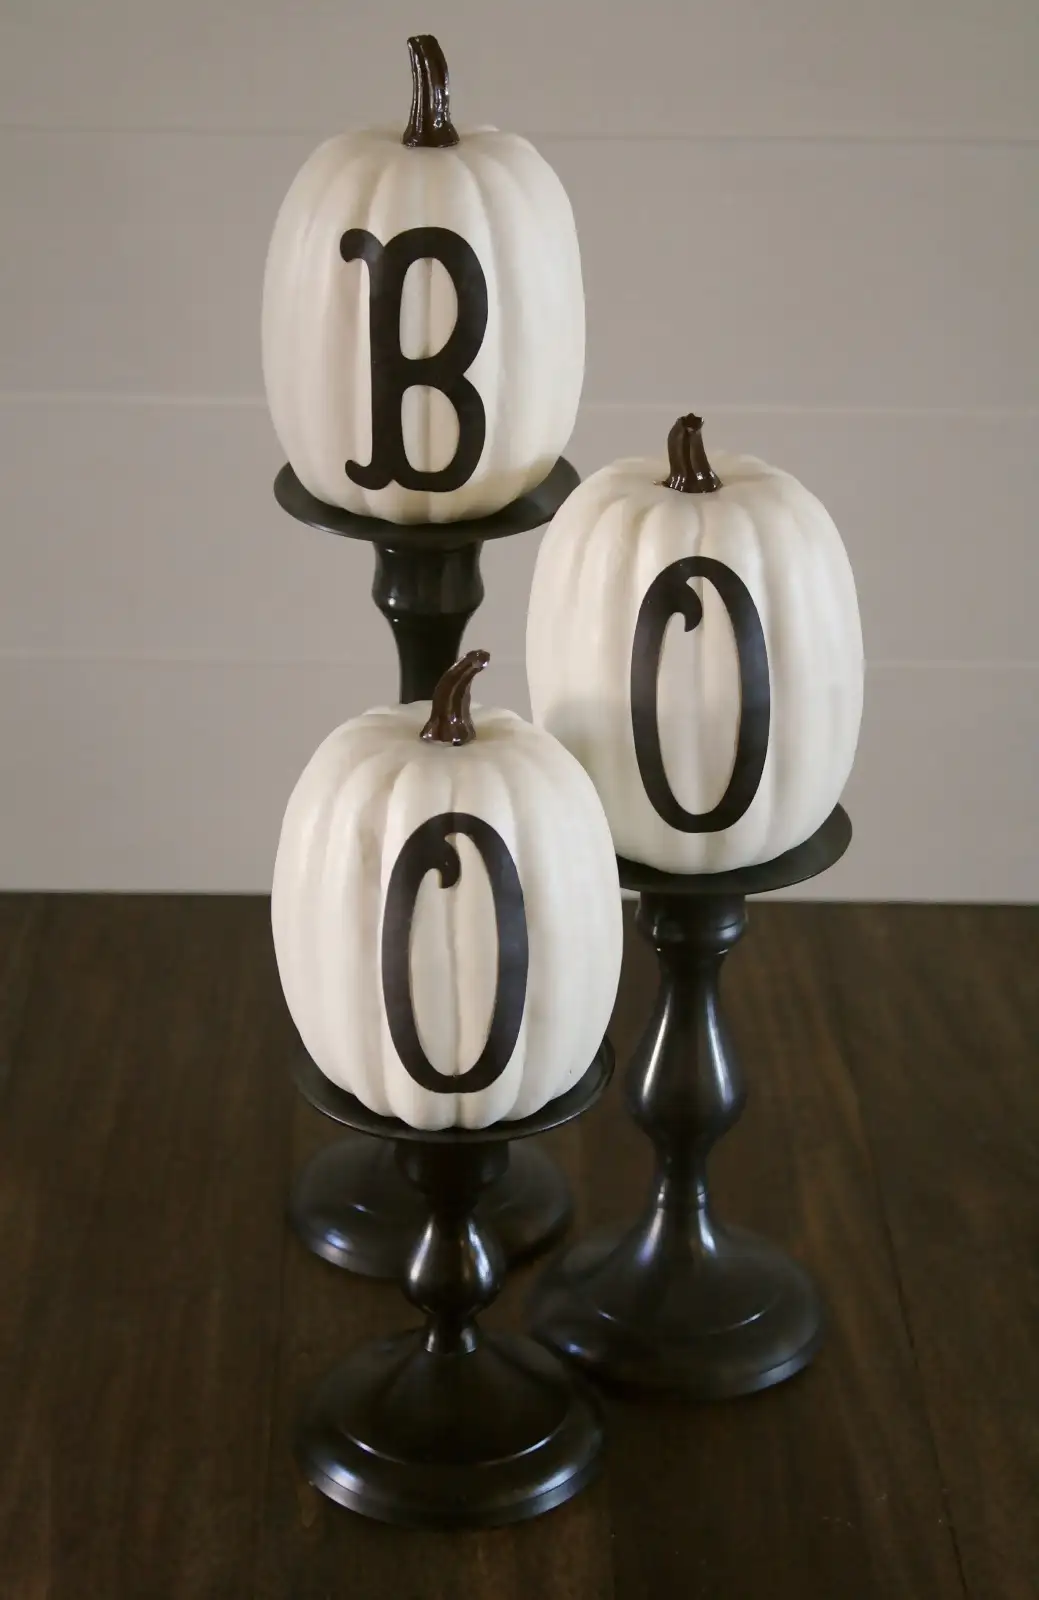 Using Pumpkins Is Always A Great Idea For Halloween Celebrations